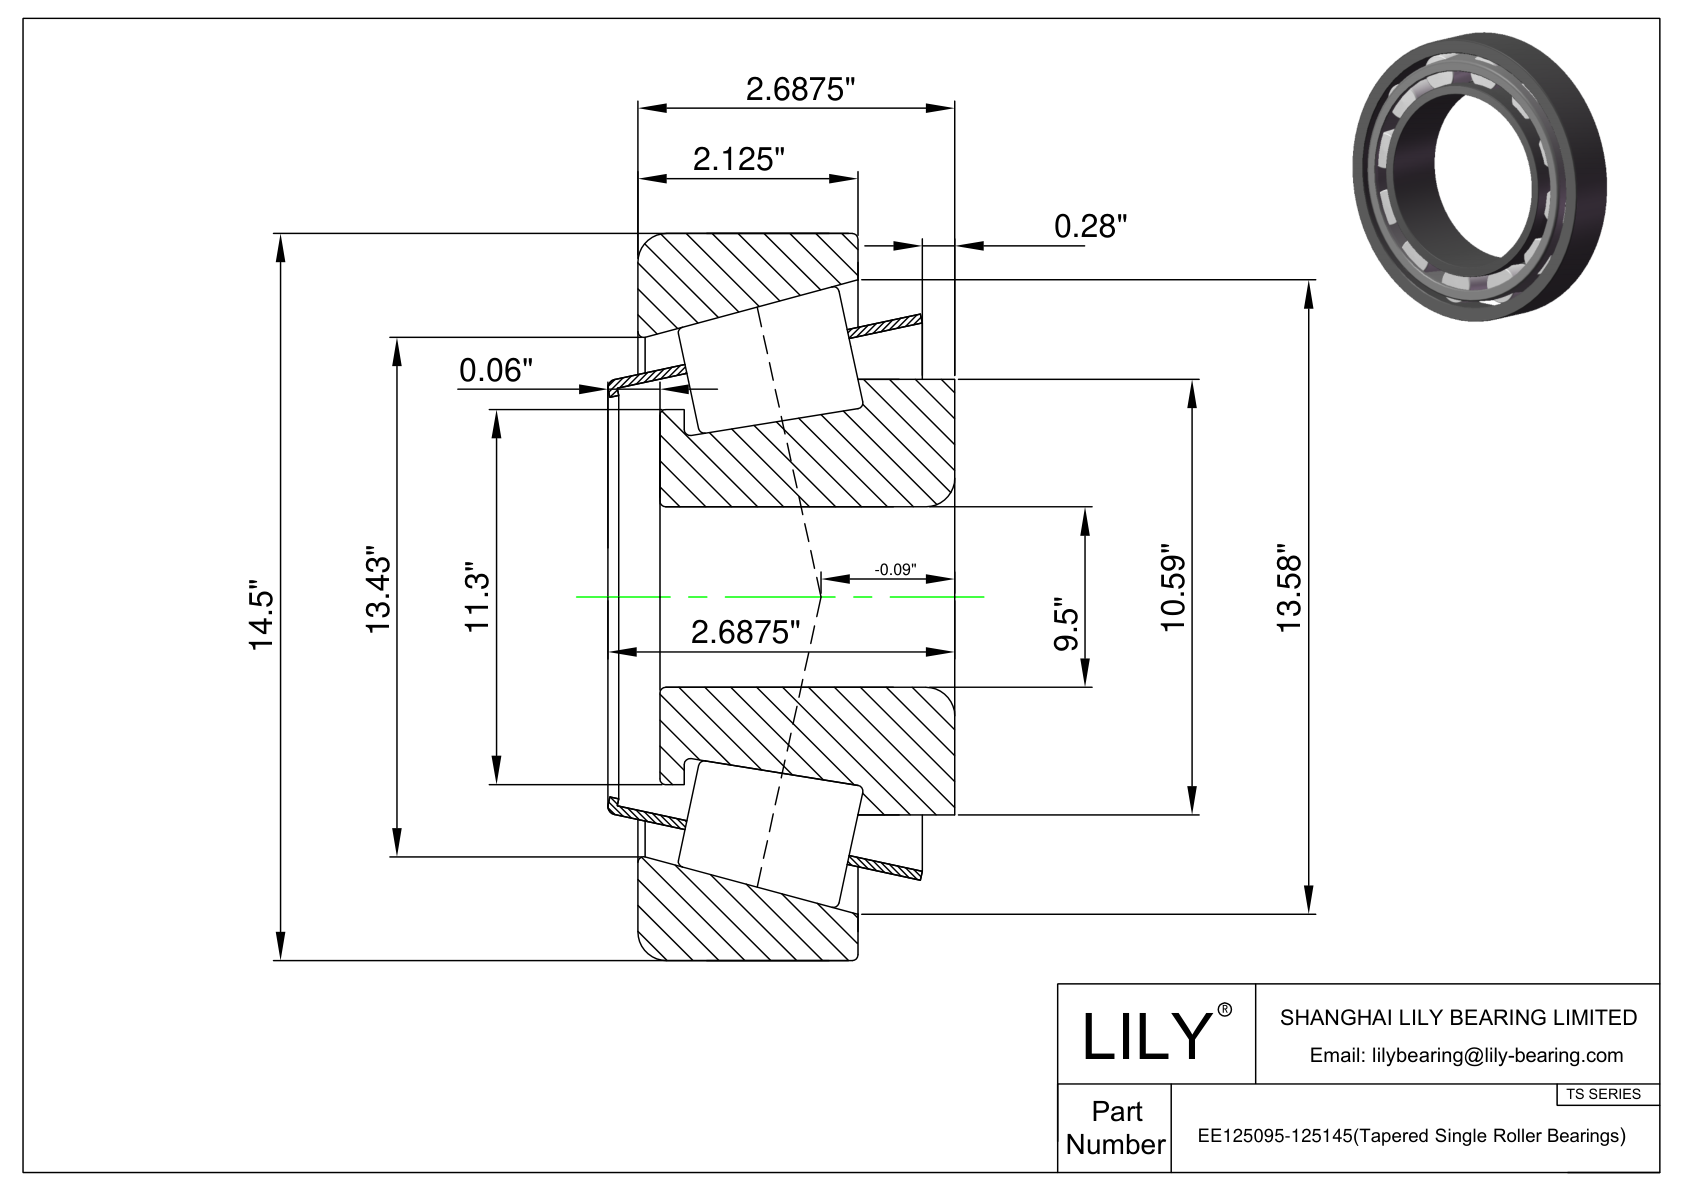 EE125095-125145 TS (Tapered Single Roller Bearings) (Imperial) cad drawing